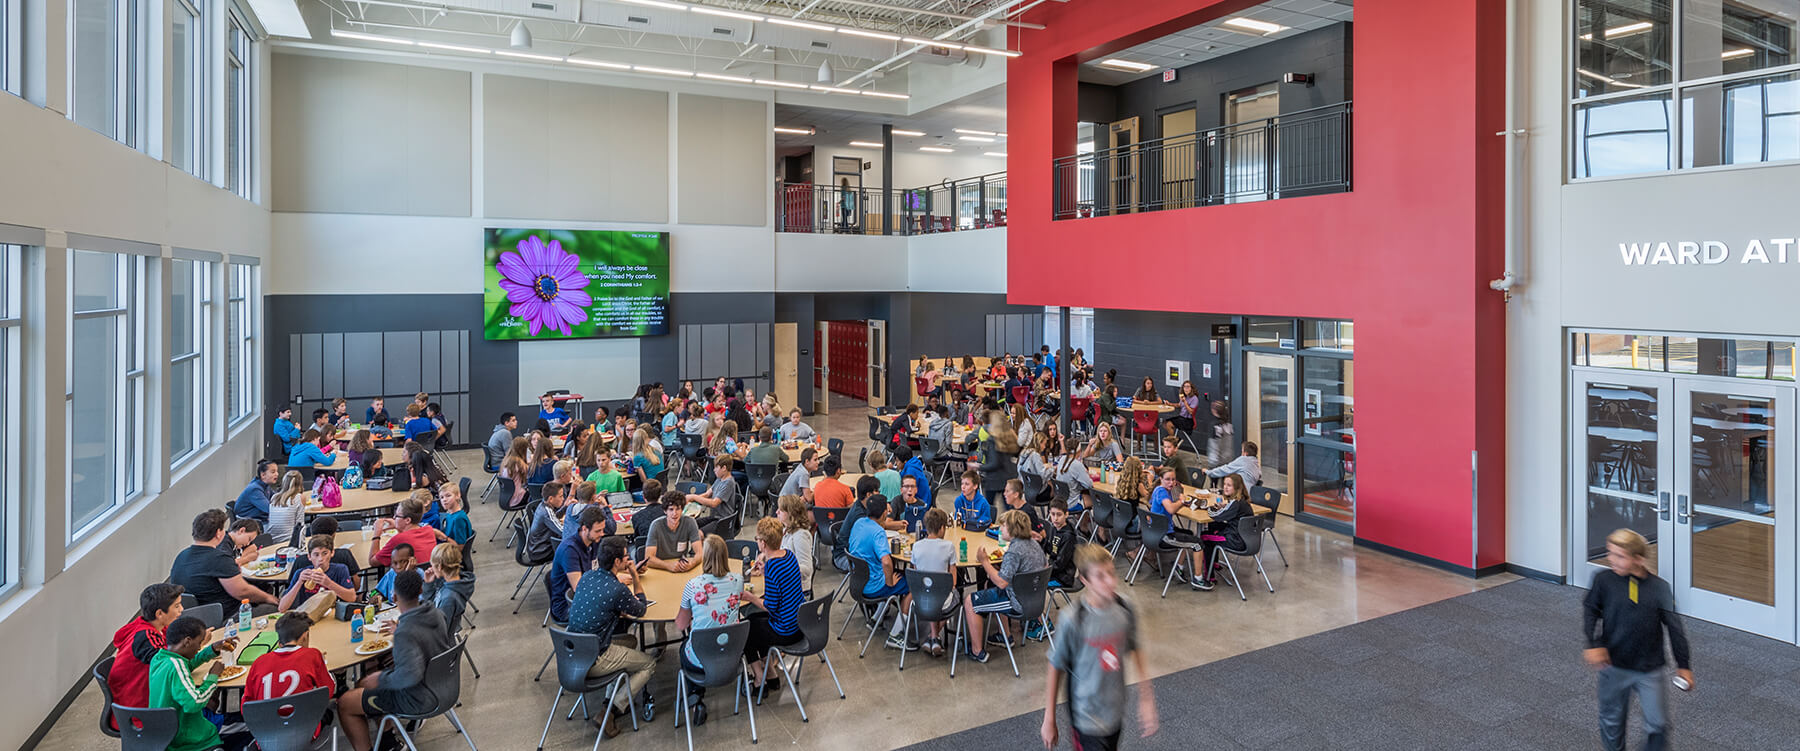 Timothy Christian Middle School Lunchroom and gathering space